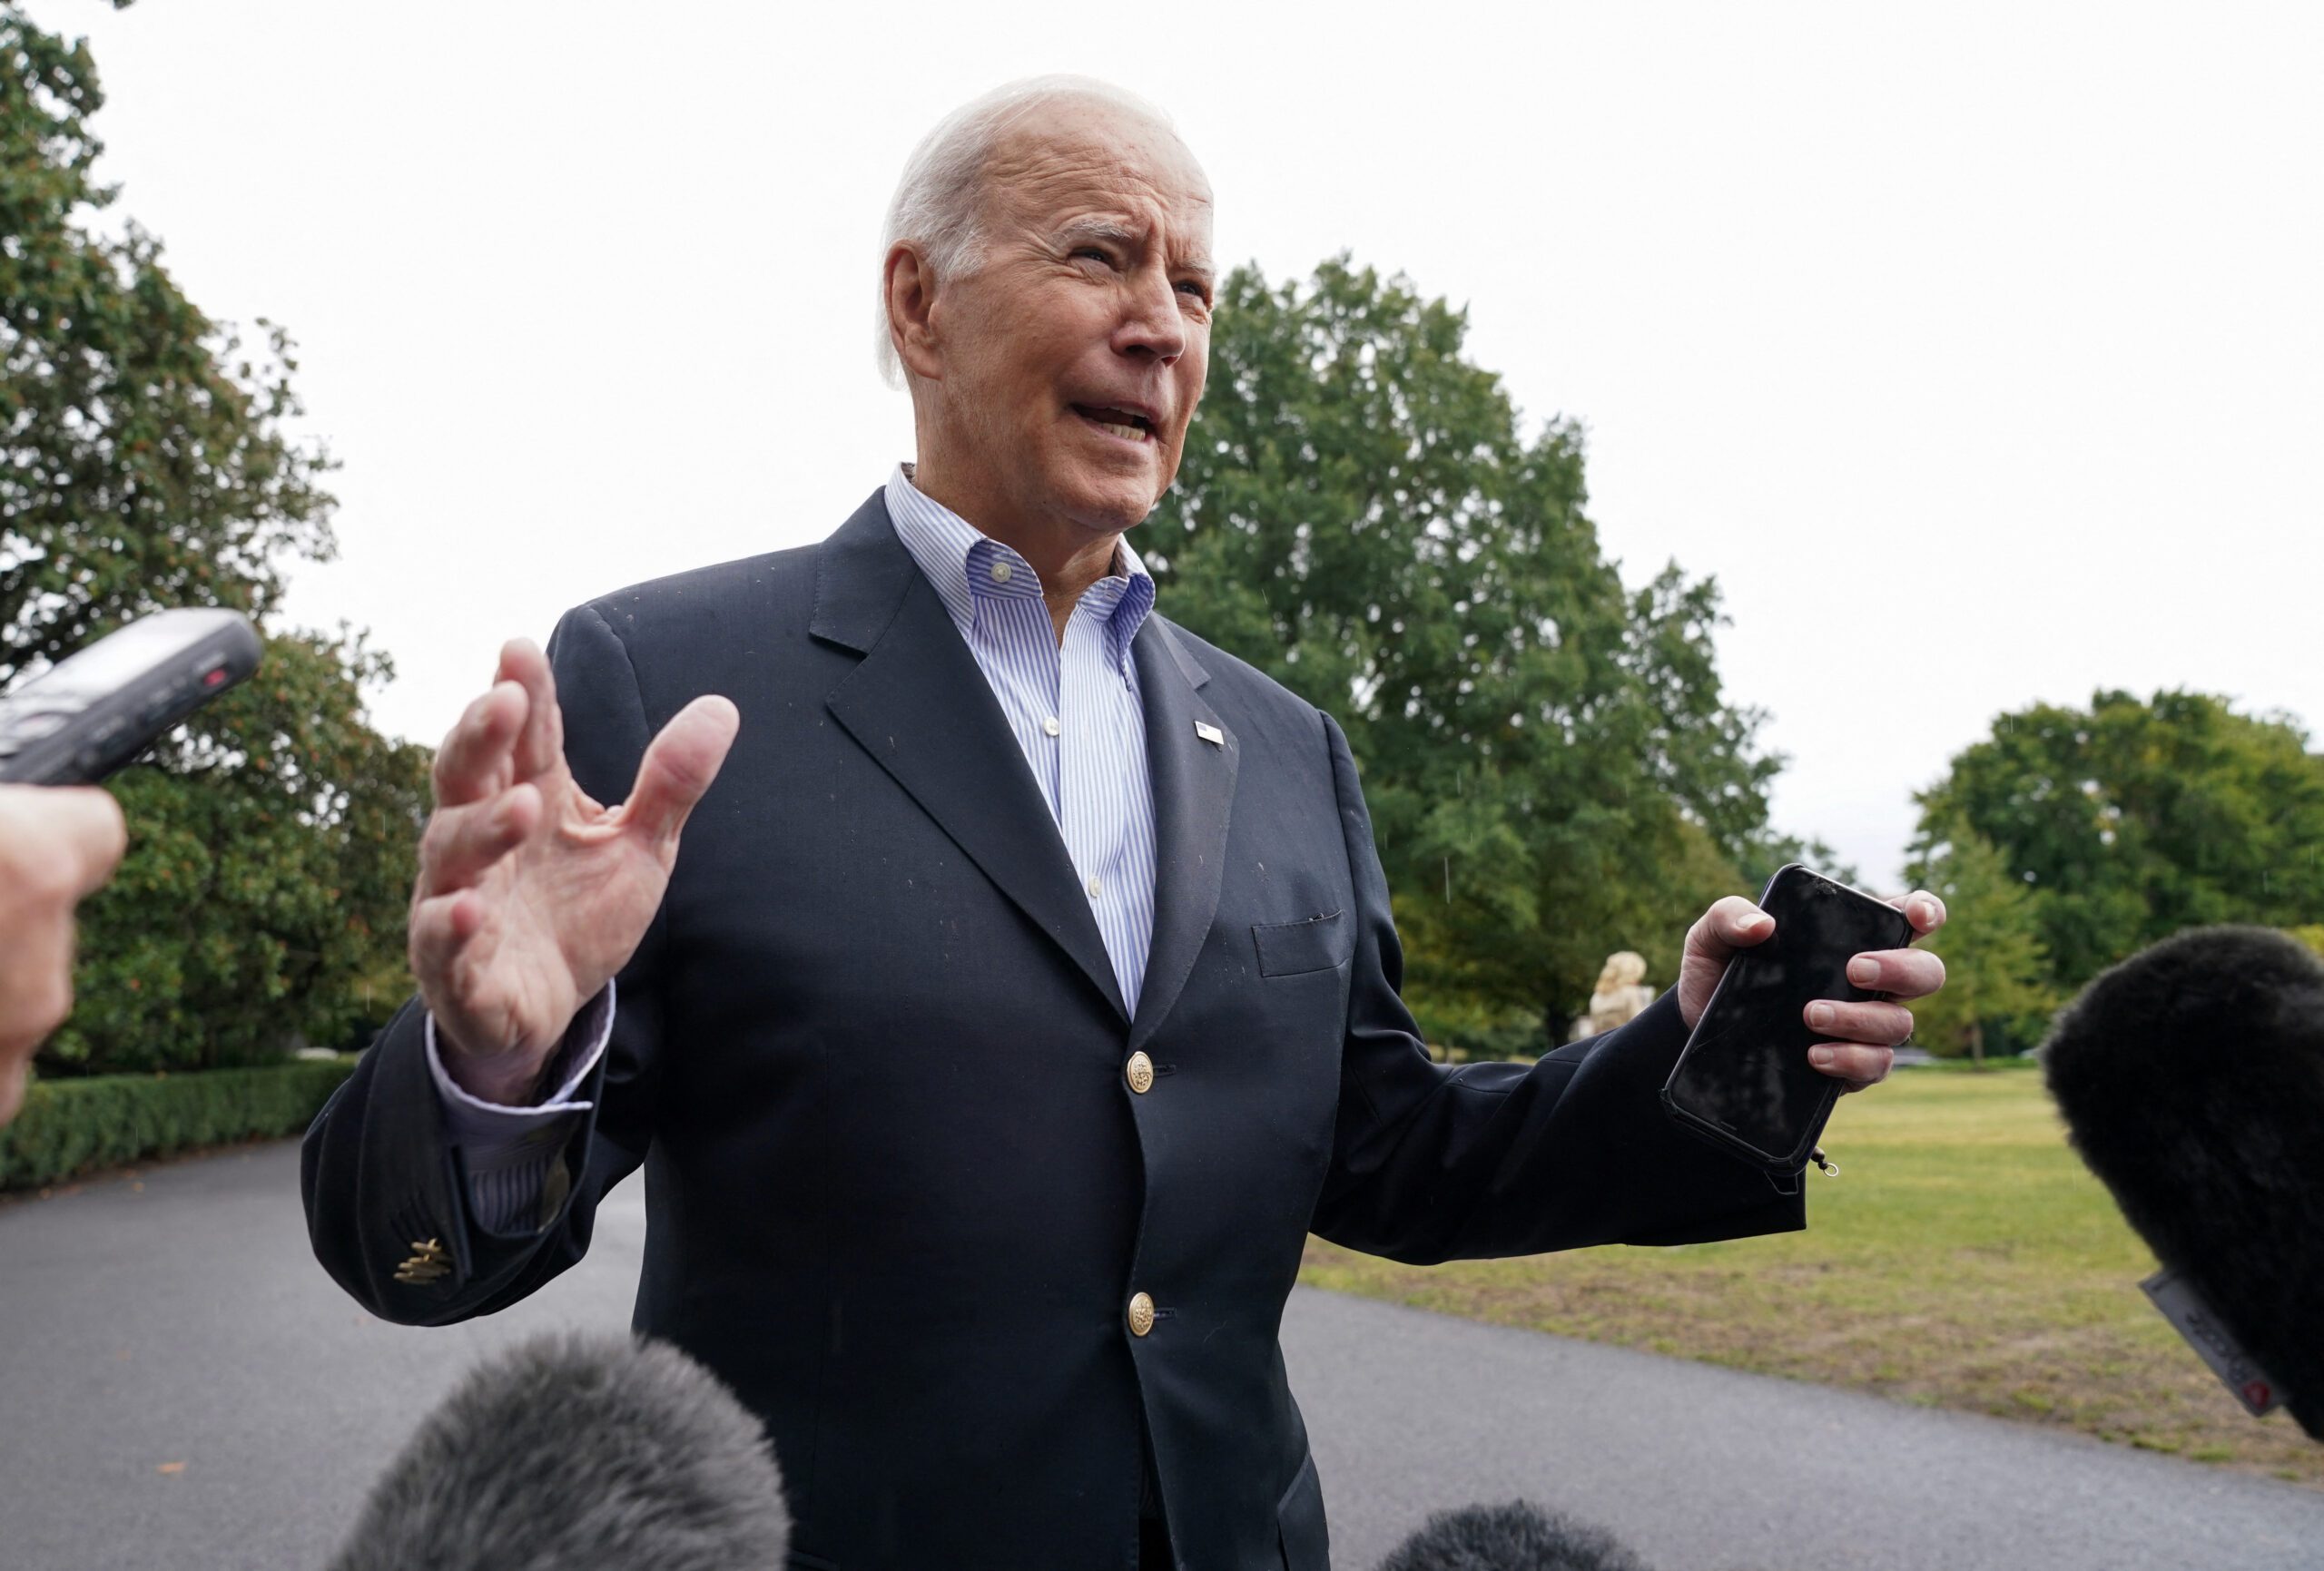 Biden pleased with election turnout, says reflects quality of party’s candidates